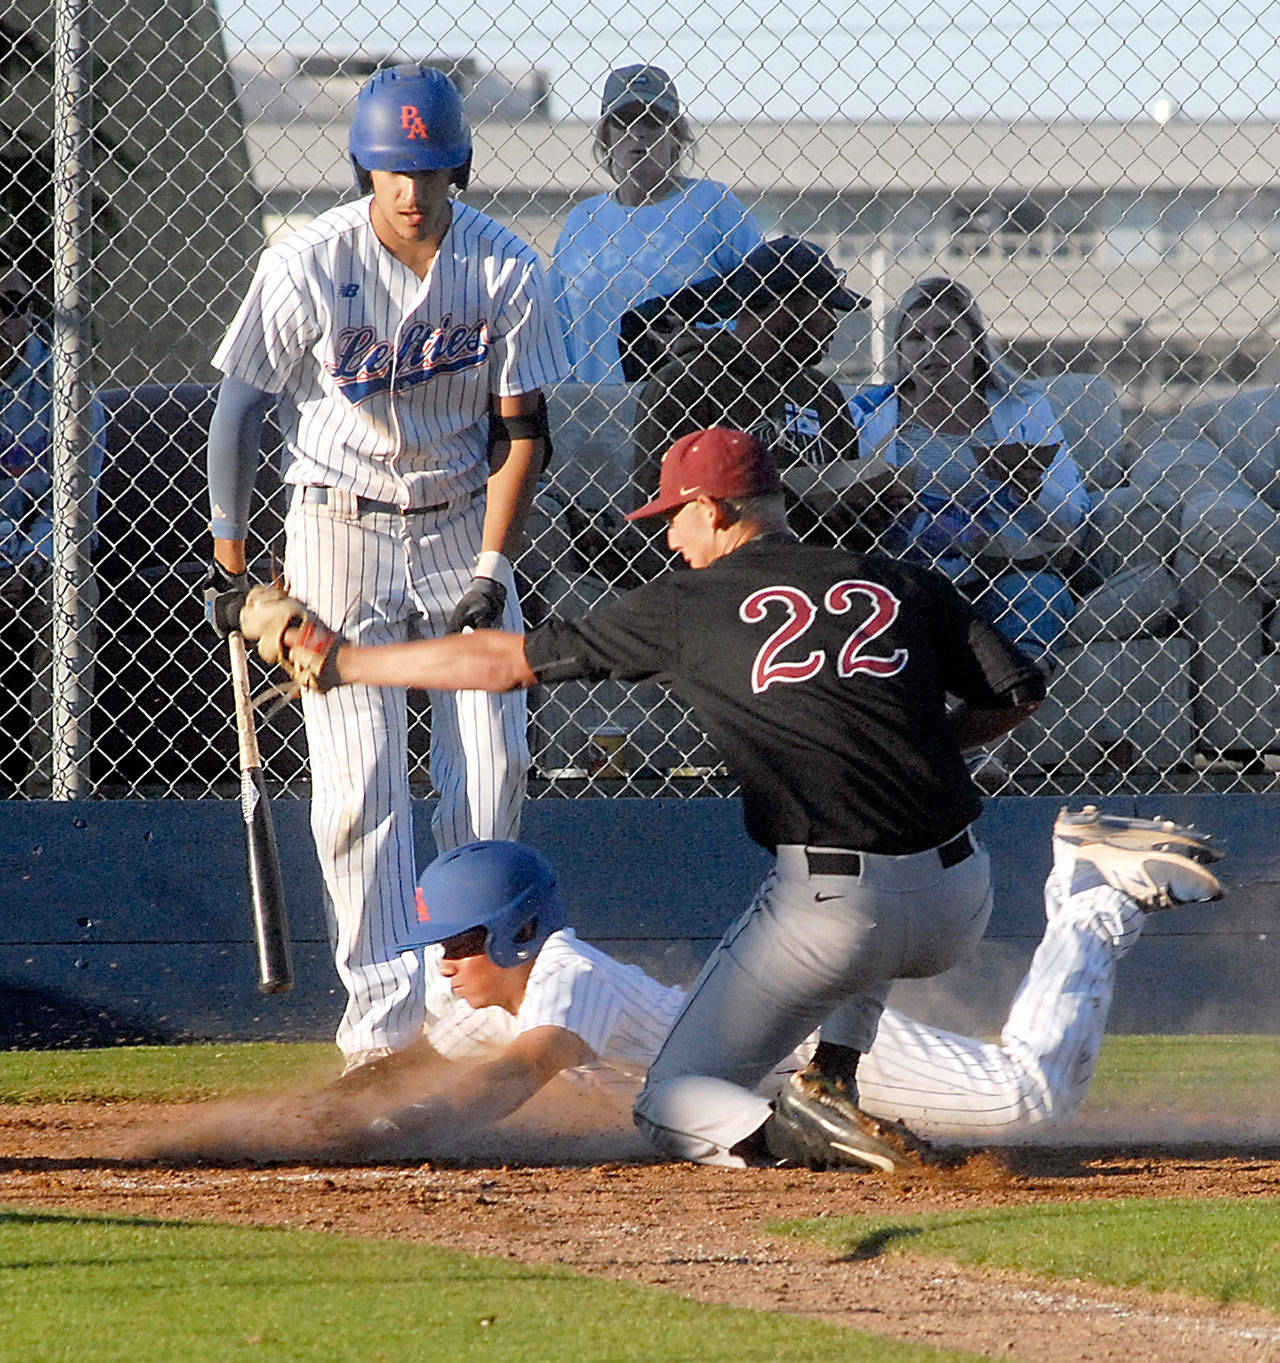 Lefties’ Austin Tengan successfully steals home after a wild pitch to Lefties batter Ian Nowak by Corvallis pitcher Cameron Richman, right, slipped past the catcher in the second inning on Friday night at Port Angeles Civic Field.                                Keith Thorpe/Peninsula Daily News